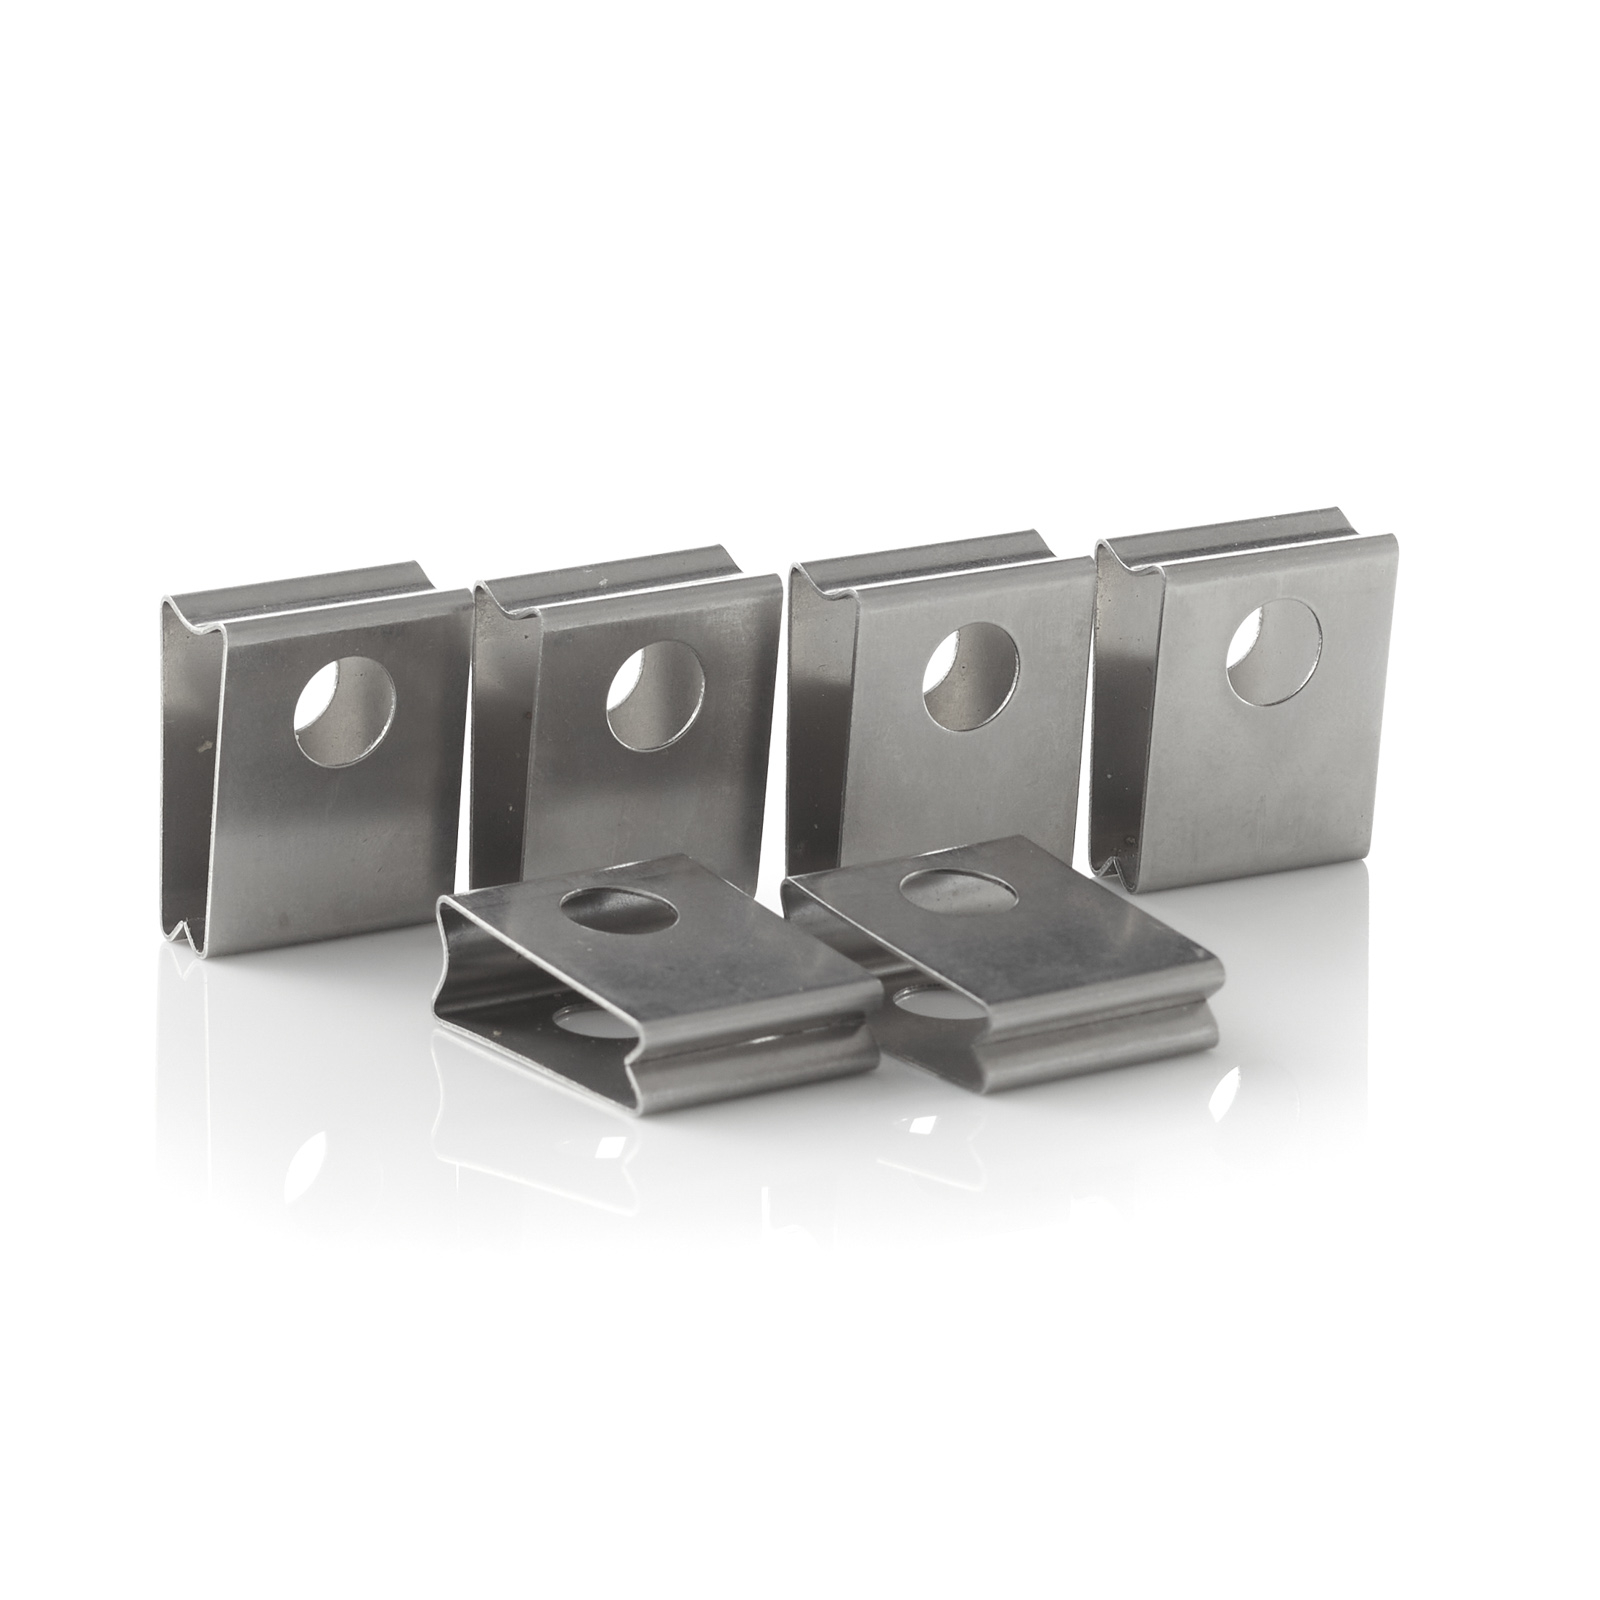 Eutrac spring clip for 3-phase mounting rail